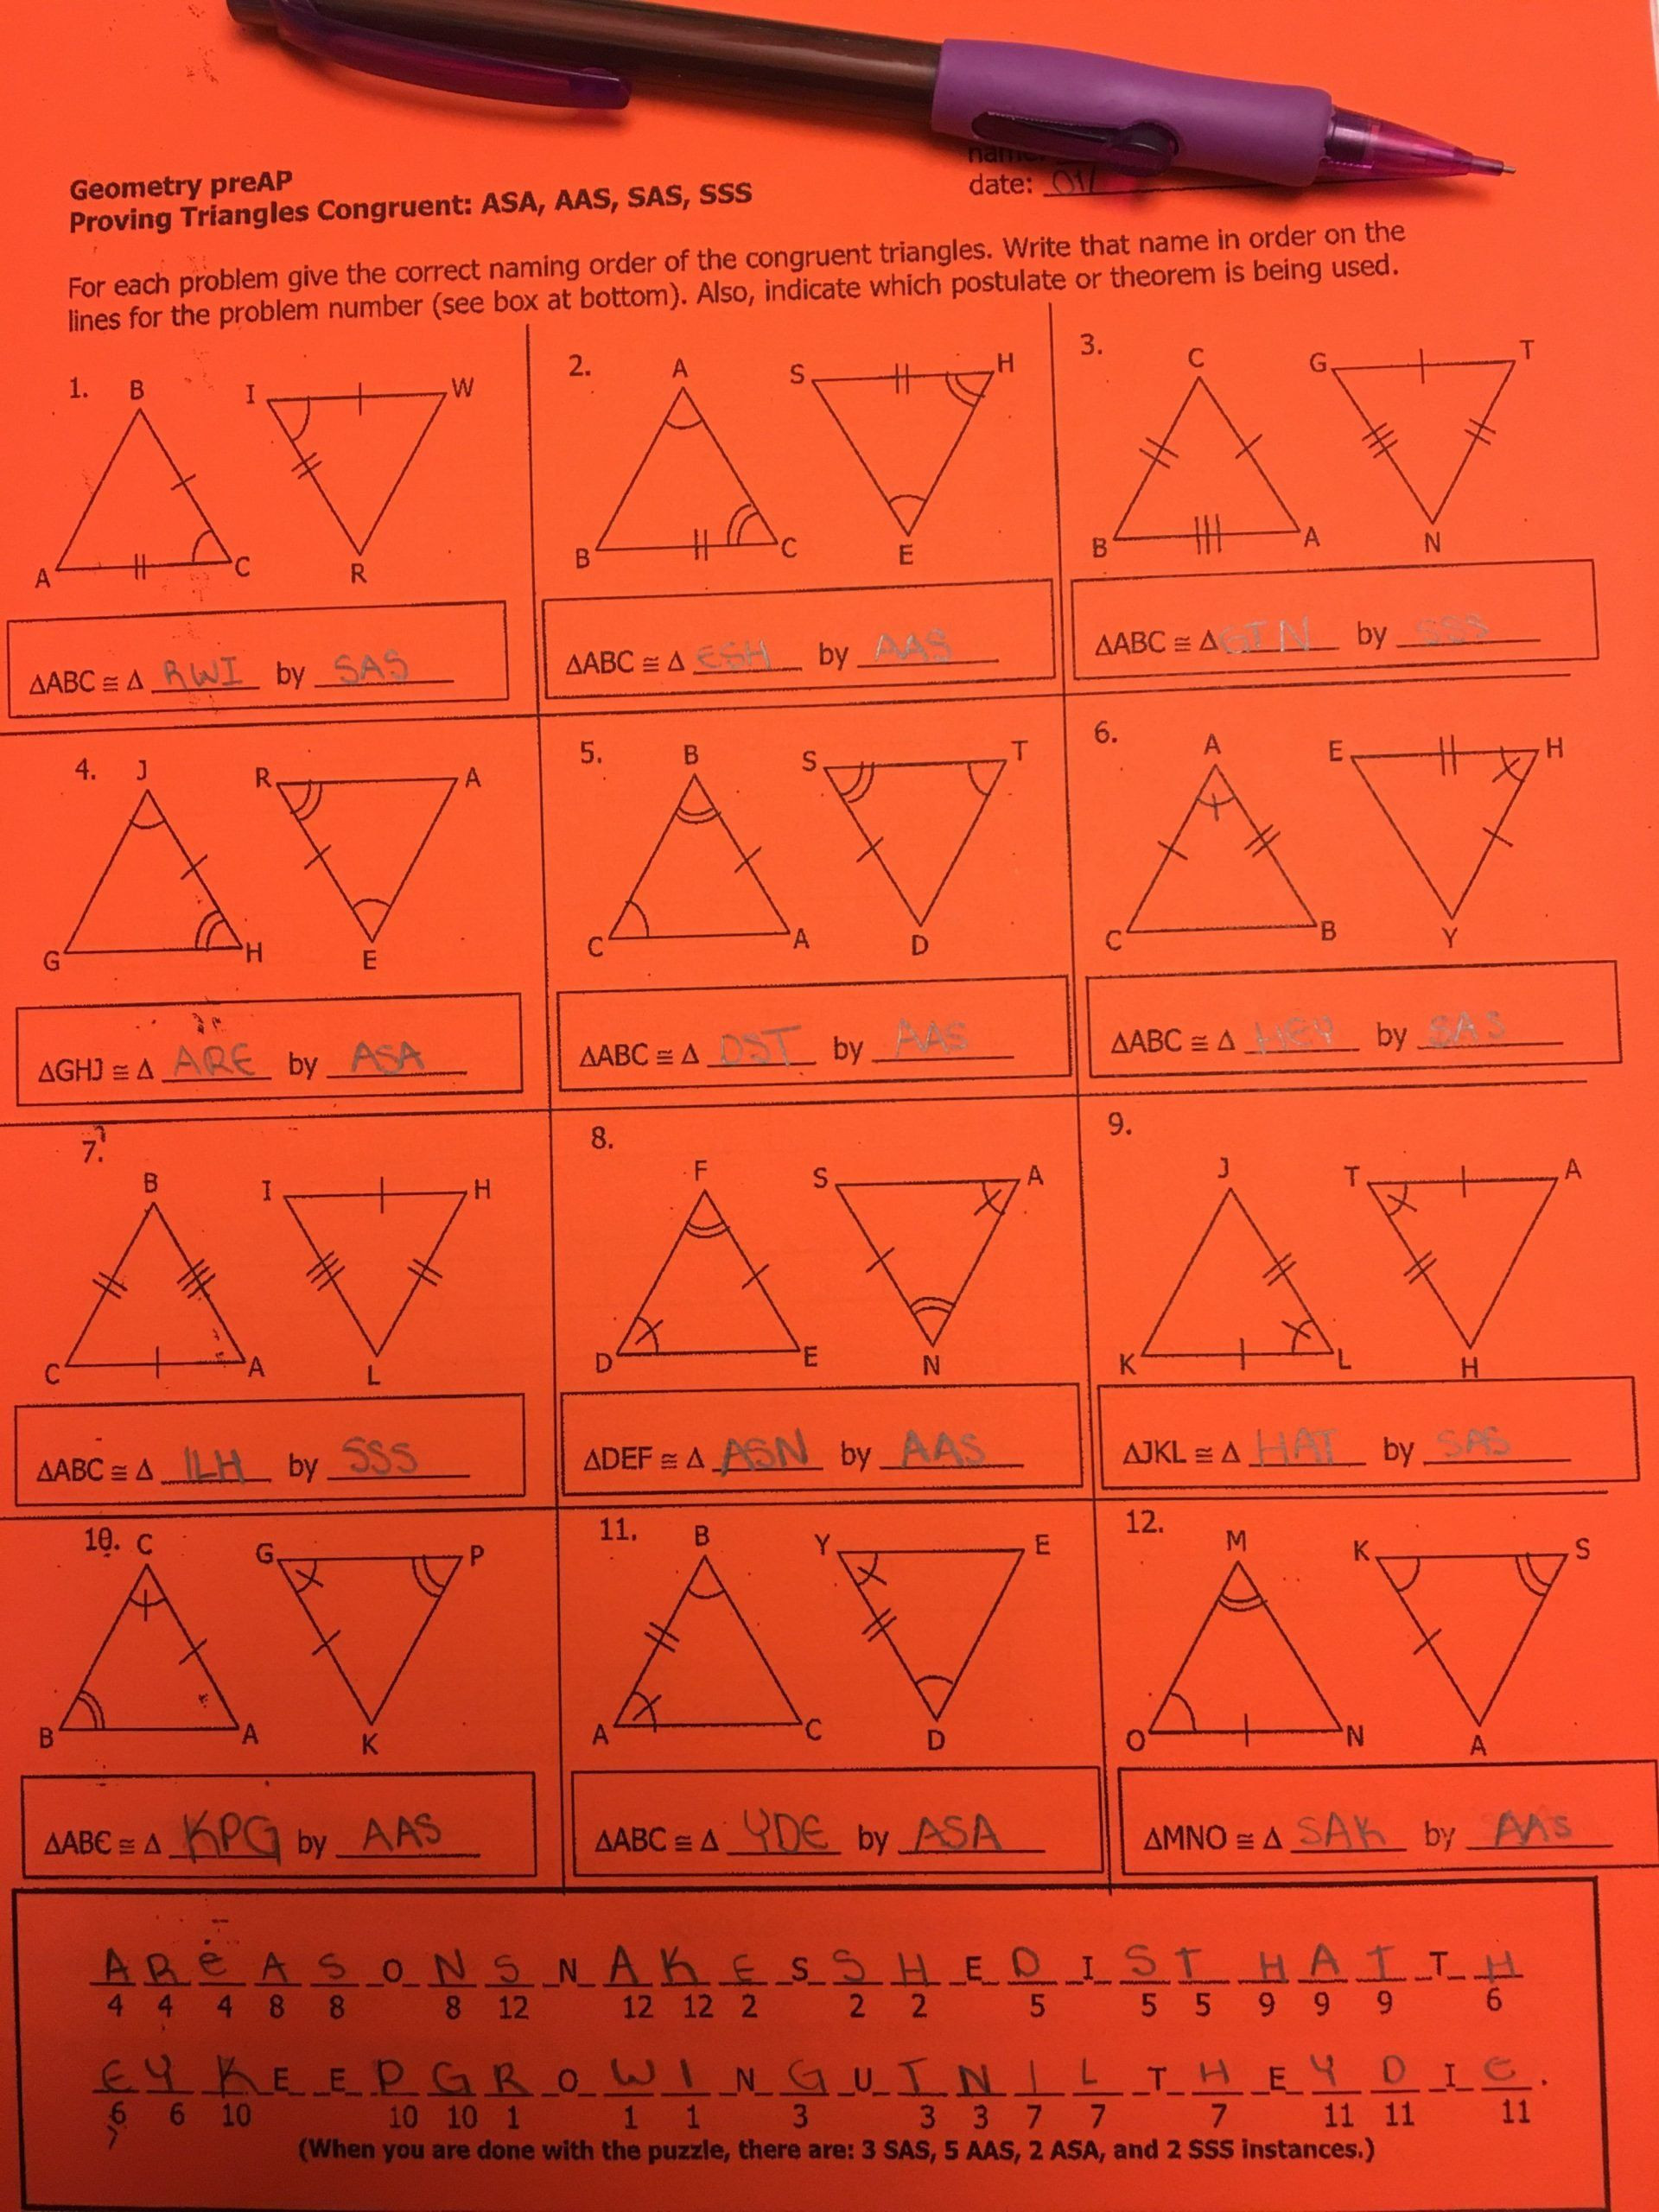 Proving Triangles Congruent Worksheet Triangle Congruence Worksheet Answer Key Geometry Preap